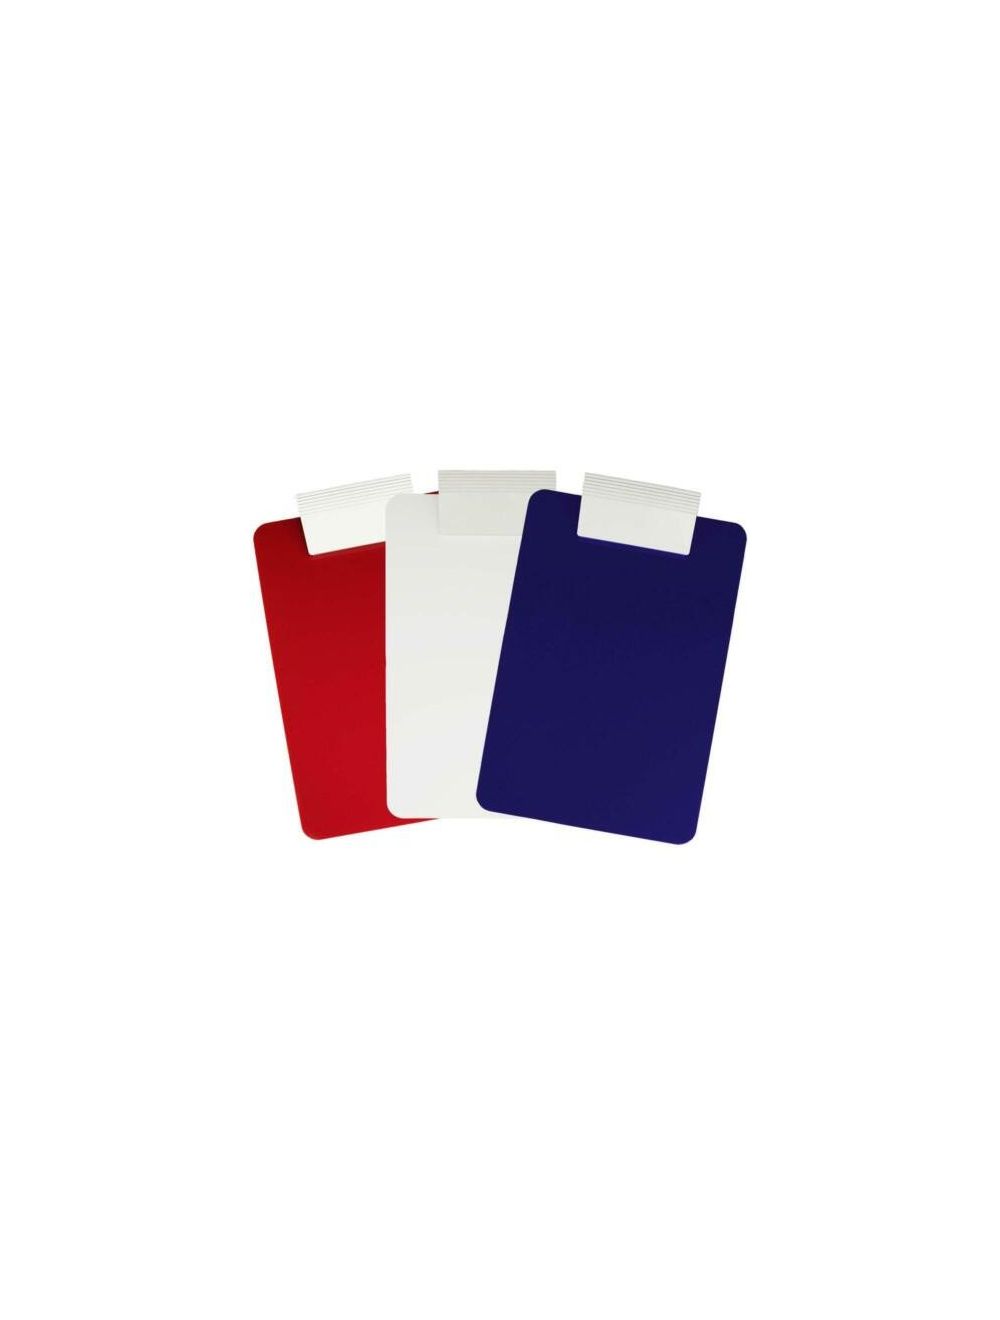 Antimicrobial Plastic Clipboard - Letter/A4 Size - Red/White/Blue 3-Pack